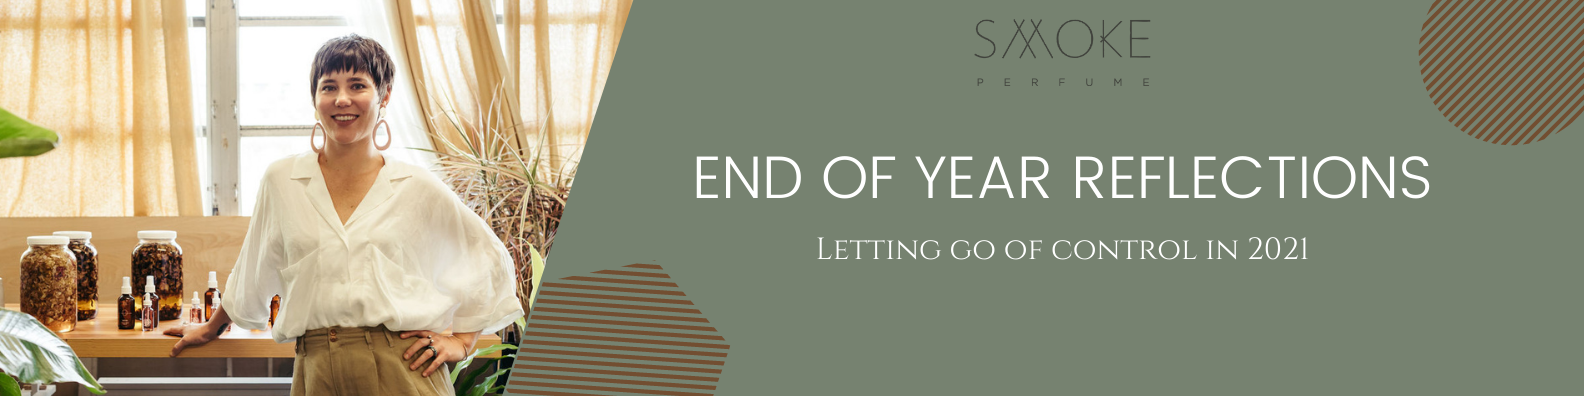 End of Year Reflection: Letting Go of Control in 2021